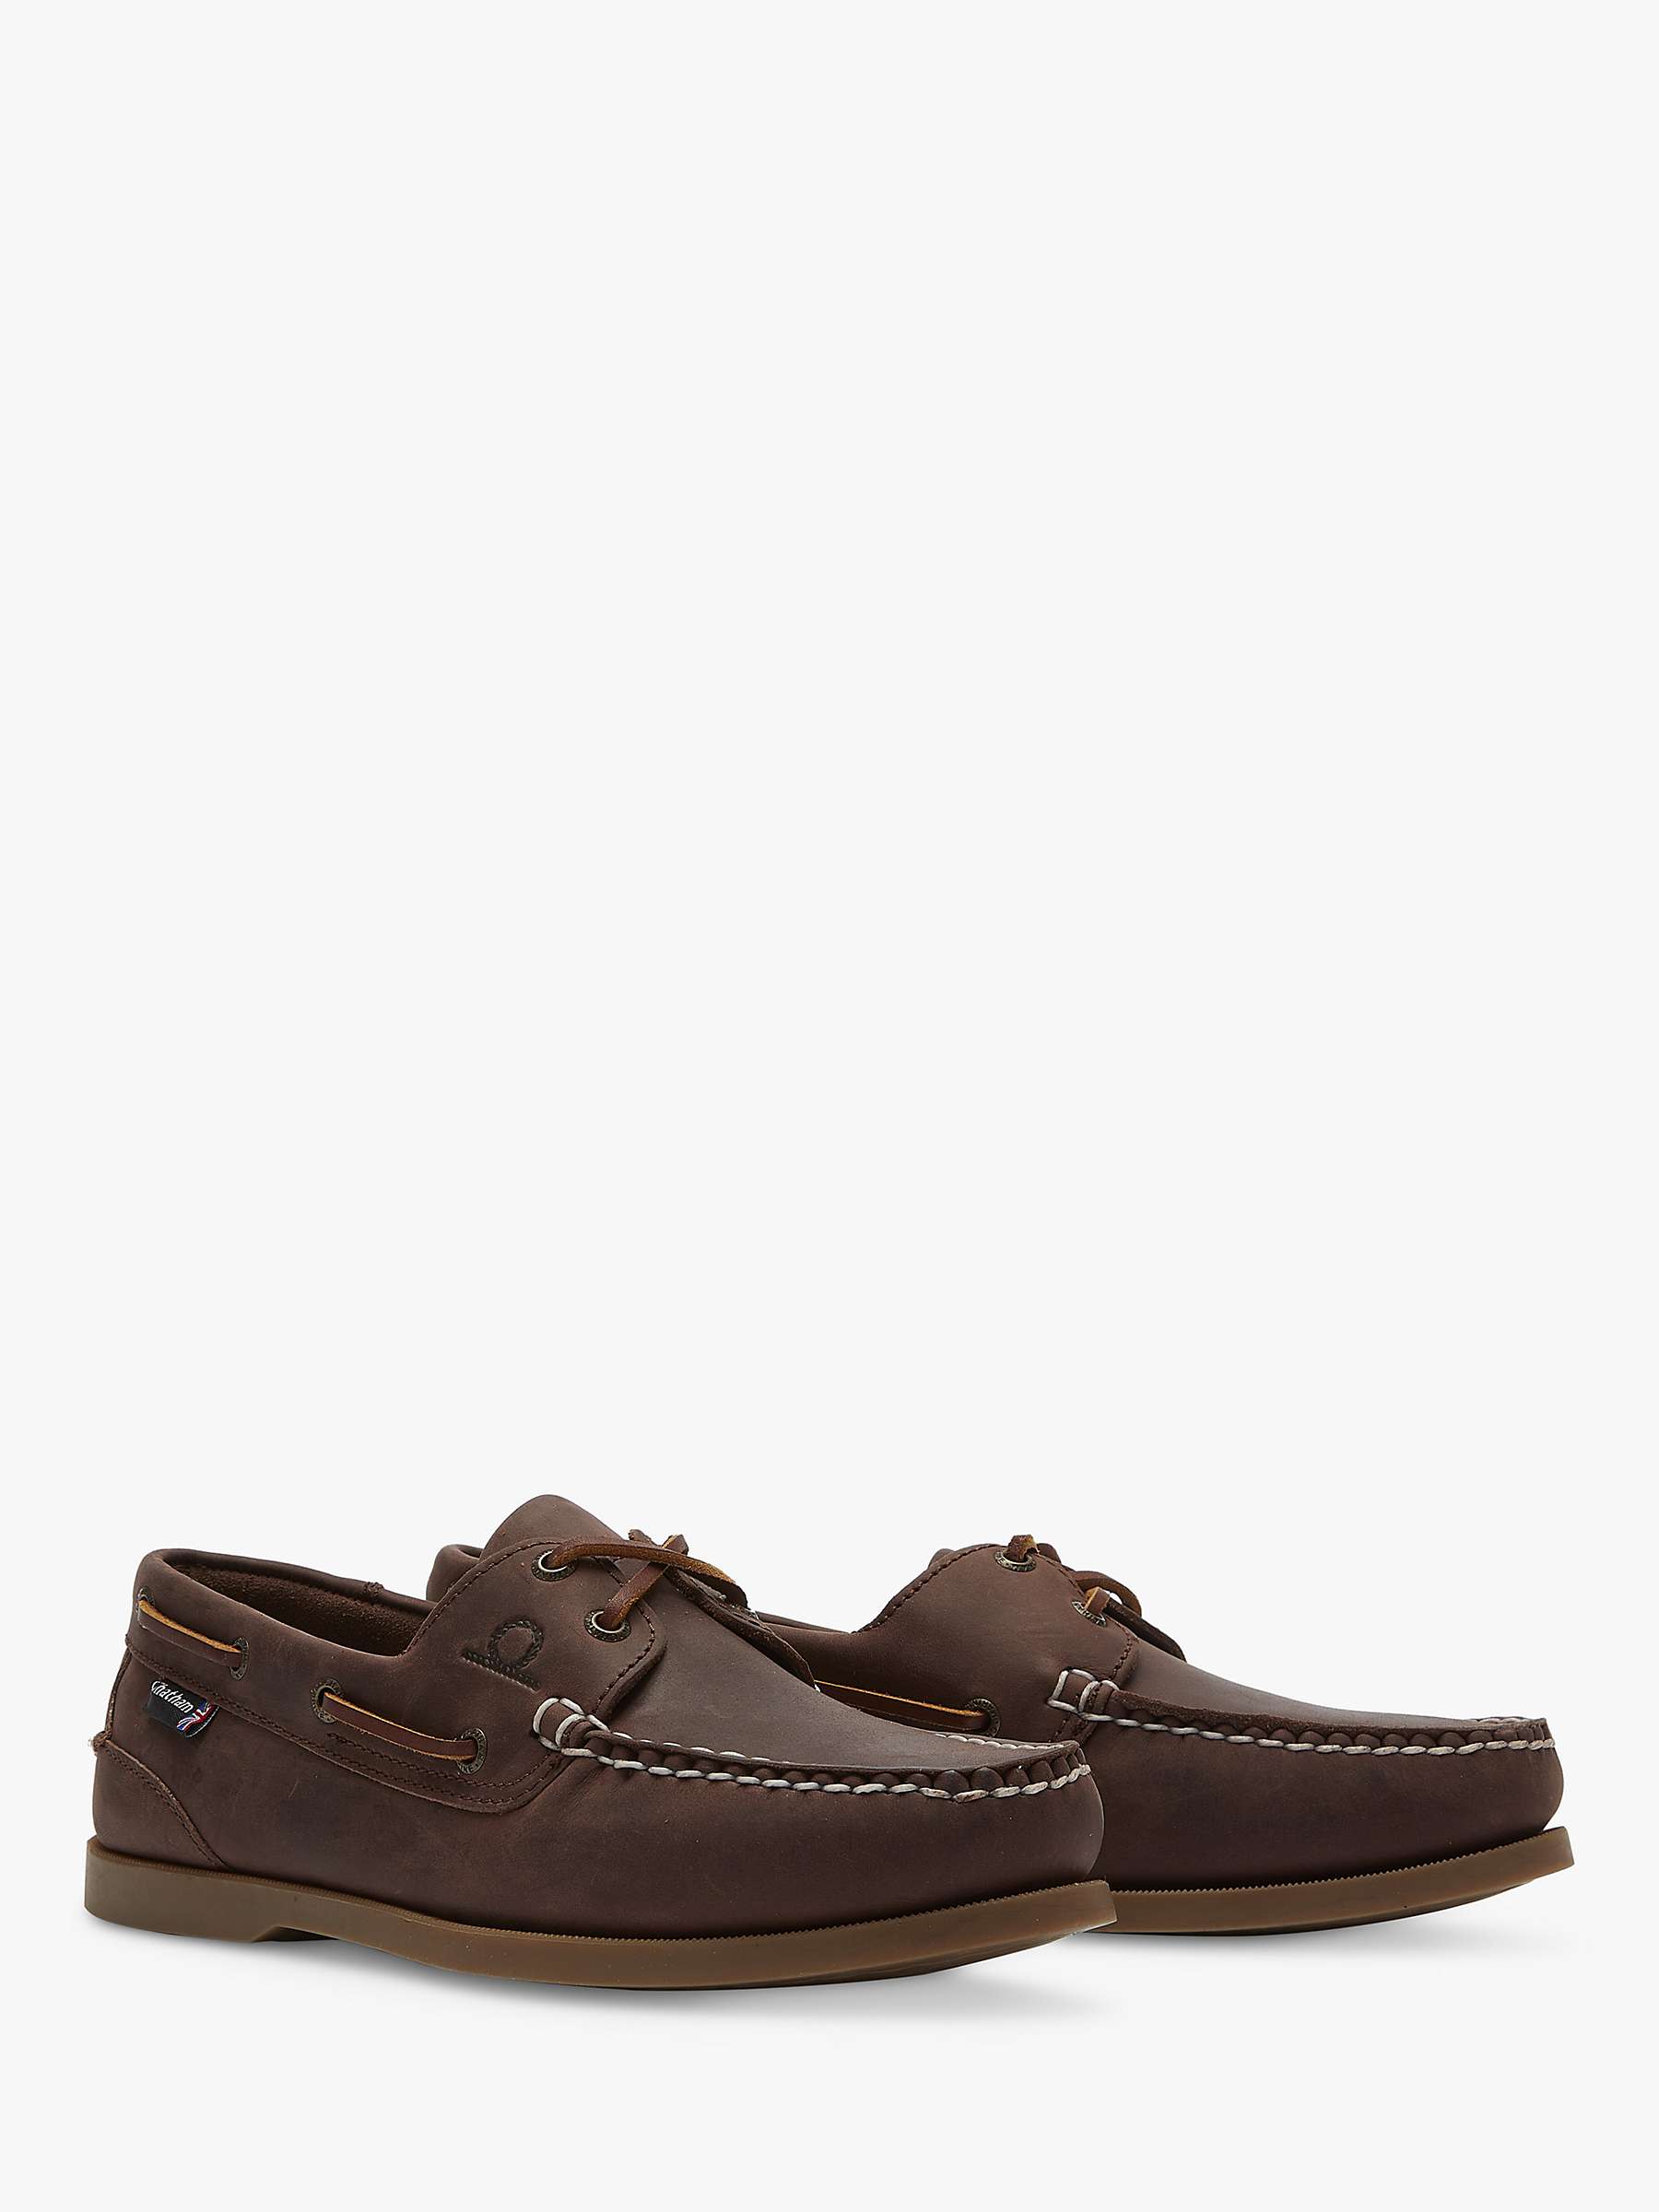 Chatham Deck II G2 Leather Boat Shoes, Chocolate at John Lewis & Partners